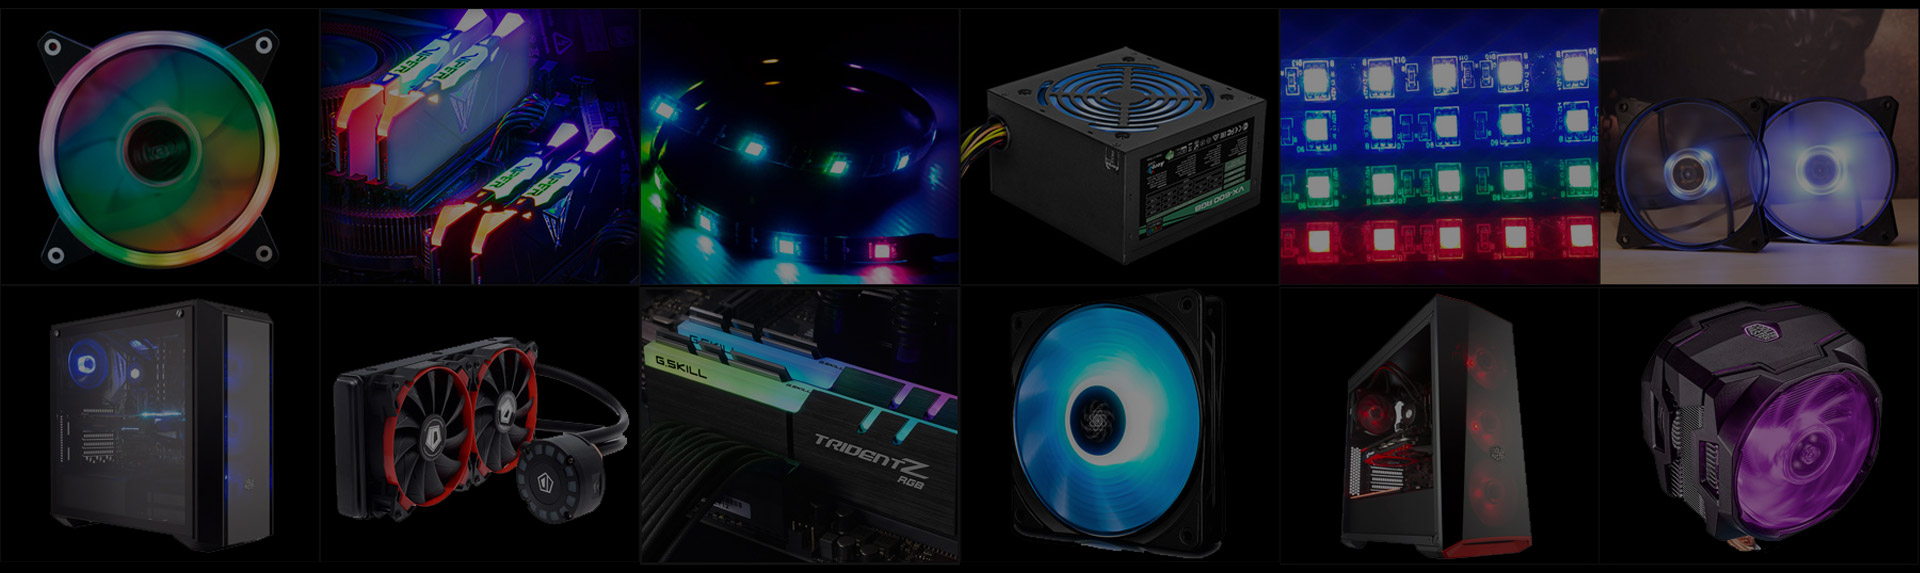 All the compatible RGB LED products from memory sticks to power supplies and cases